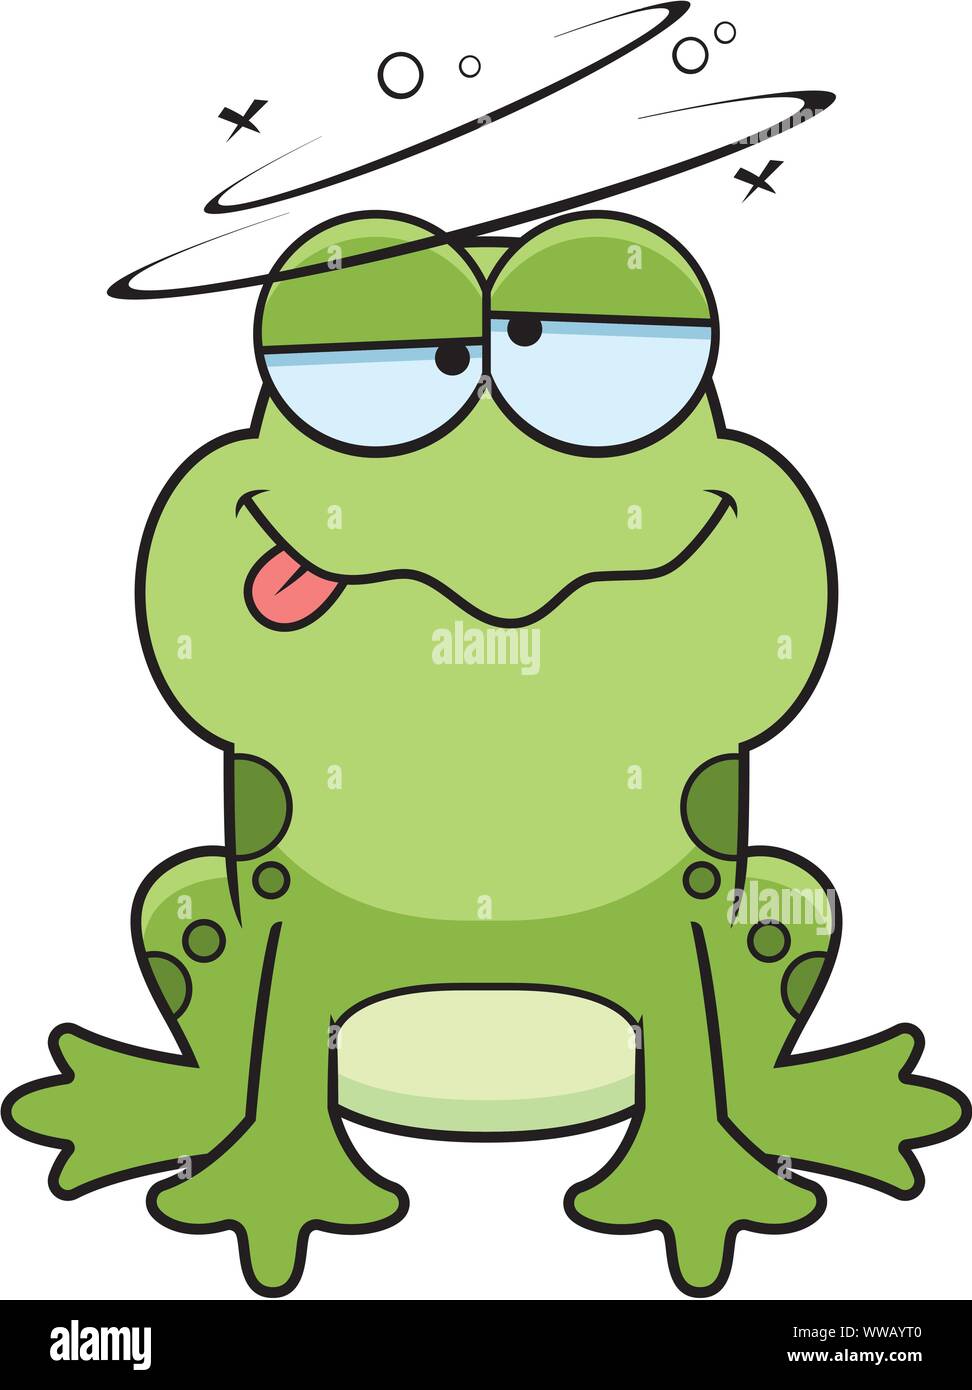 A cartoon illustration of a frog looking drunk. Stock Vector